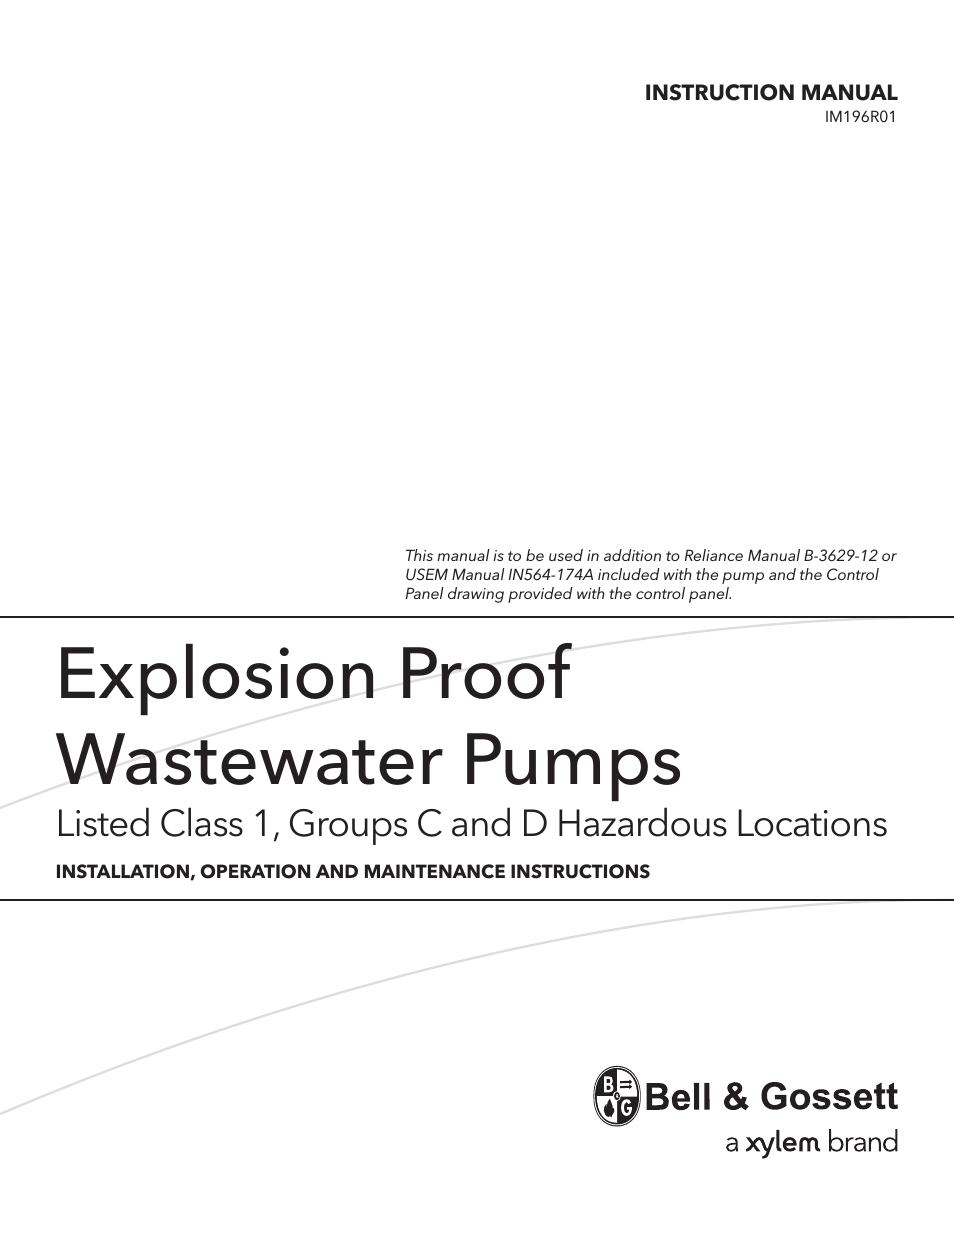 IM196 R01 Explosion Proof Wastewater Pumps Listed Class 1, Groups C and D Hazardous Locations